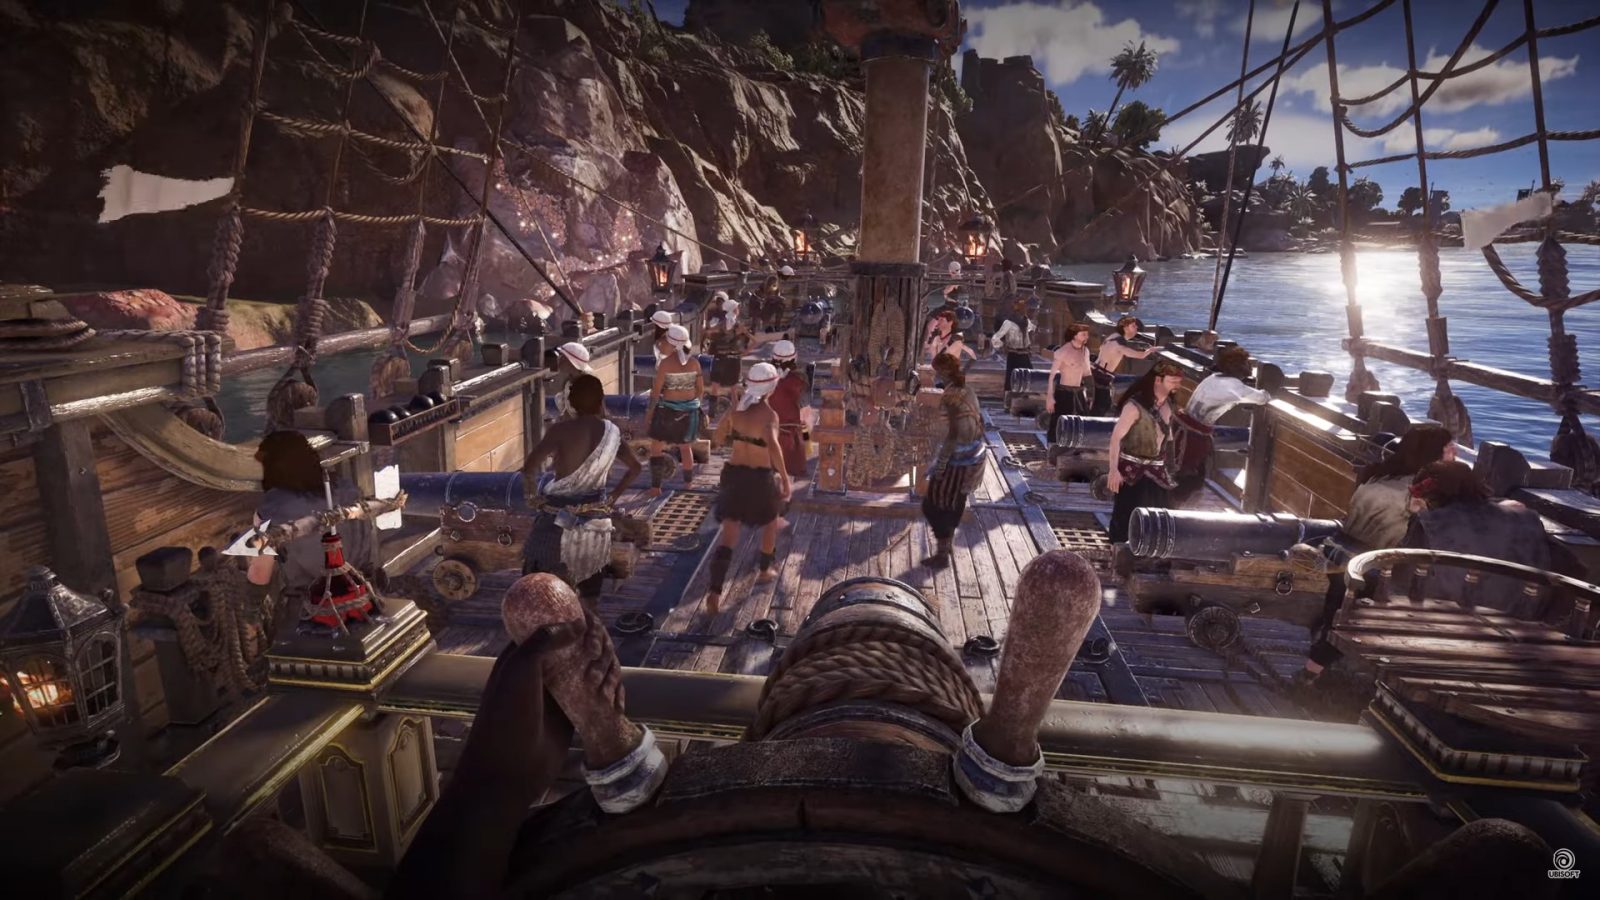 You can keep Skull and Bones – the best open world pirate game